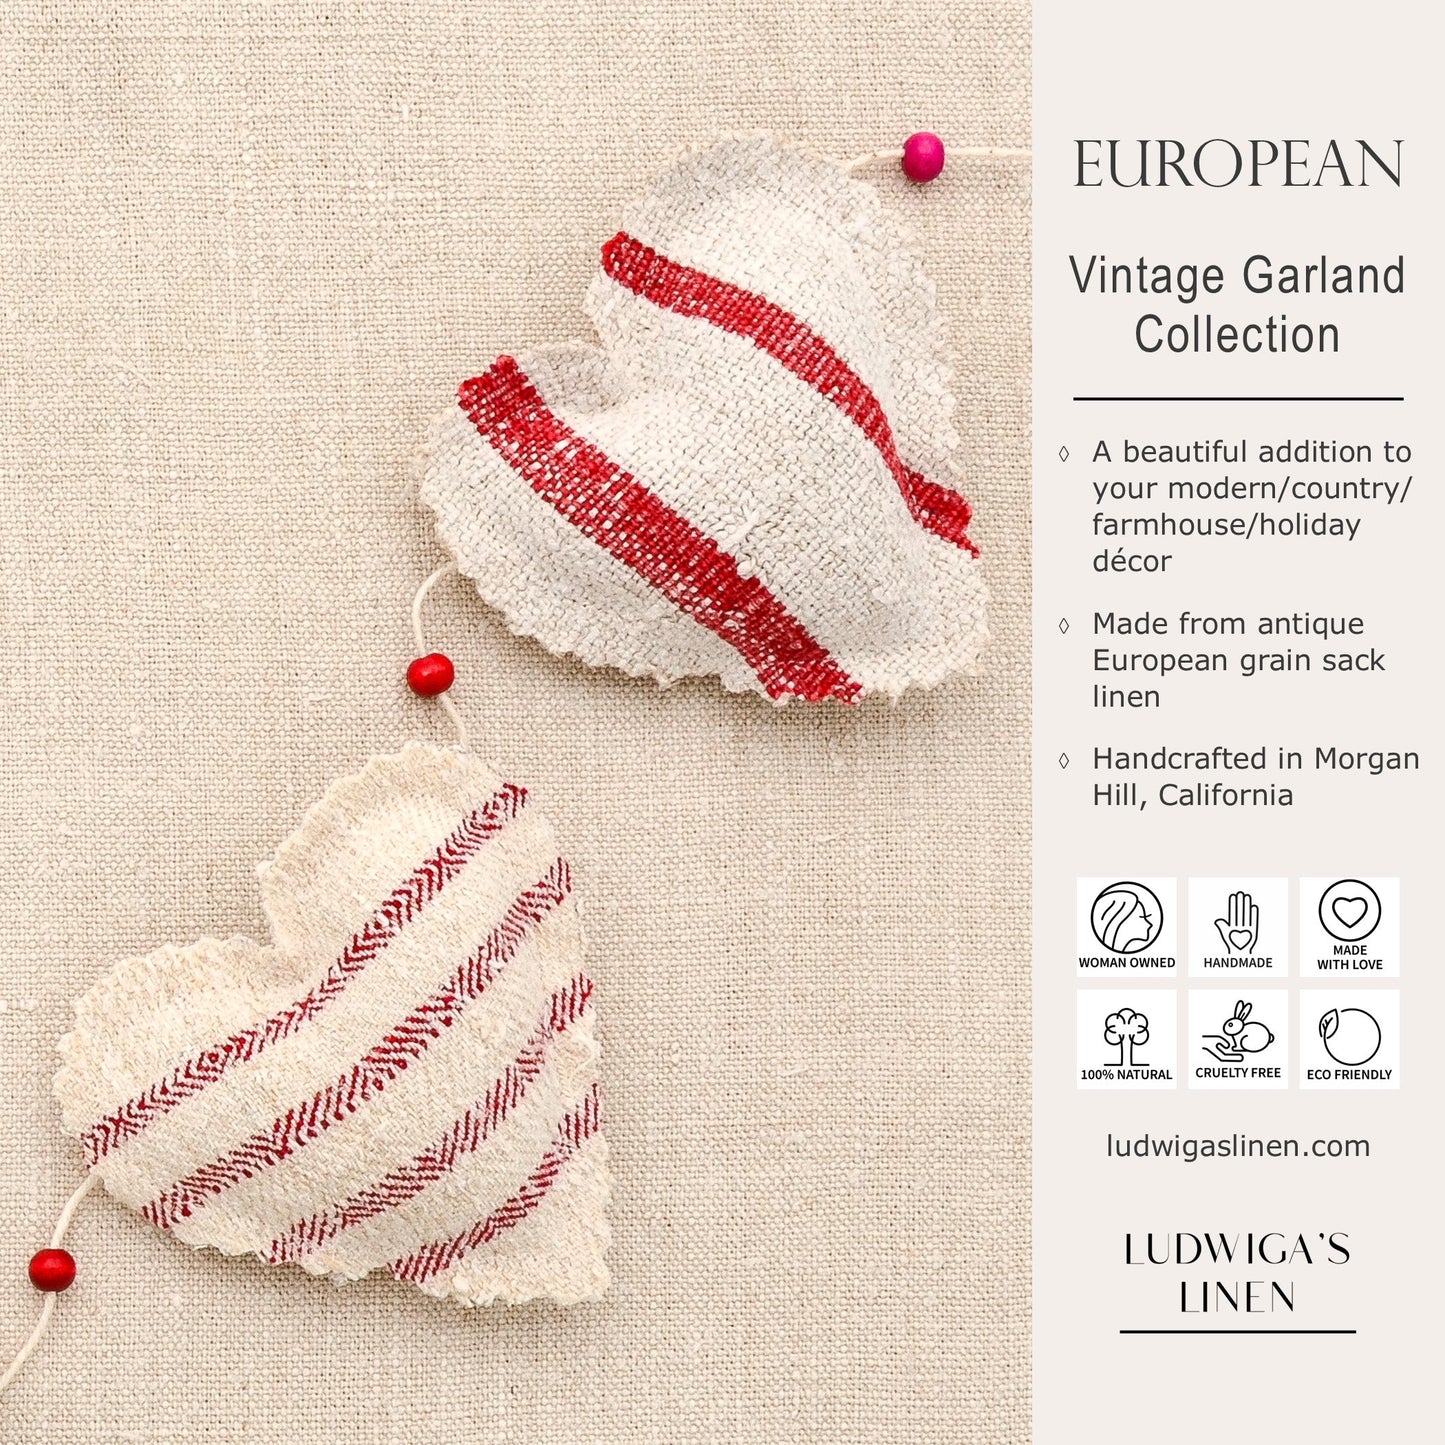 Focus on two hearts in this vintage European grain sack linen garland, white cotton twine and wooden beads between hearts